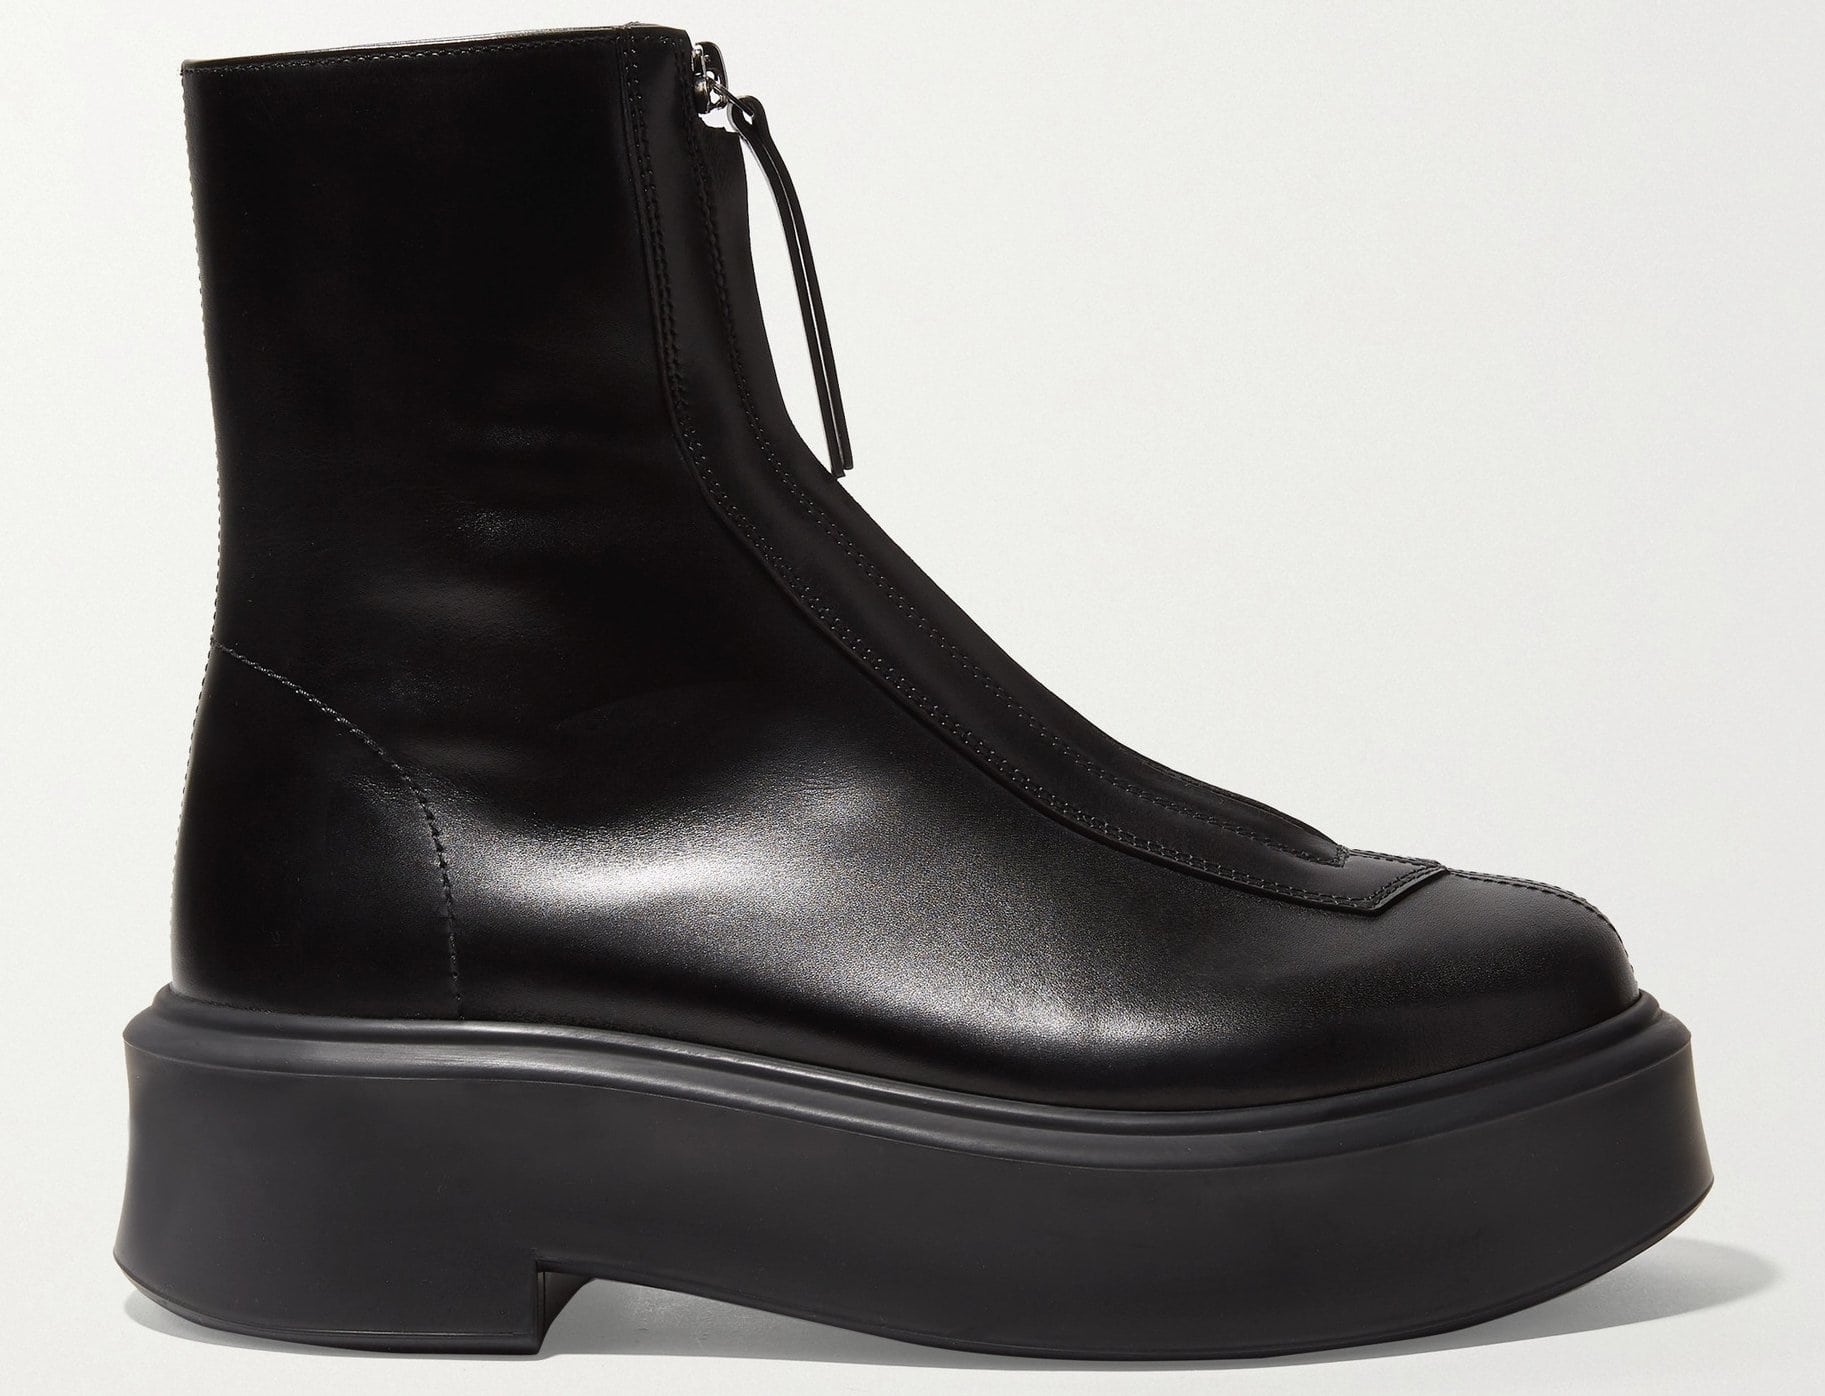 A combat-inspired ankle boot made from supple leather with a front zipper and a chunky sole